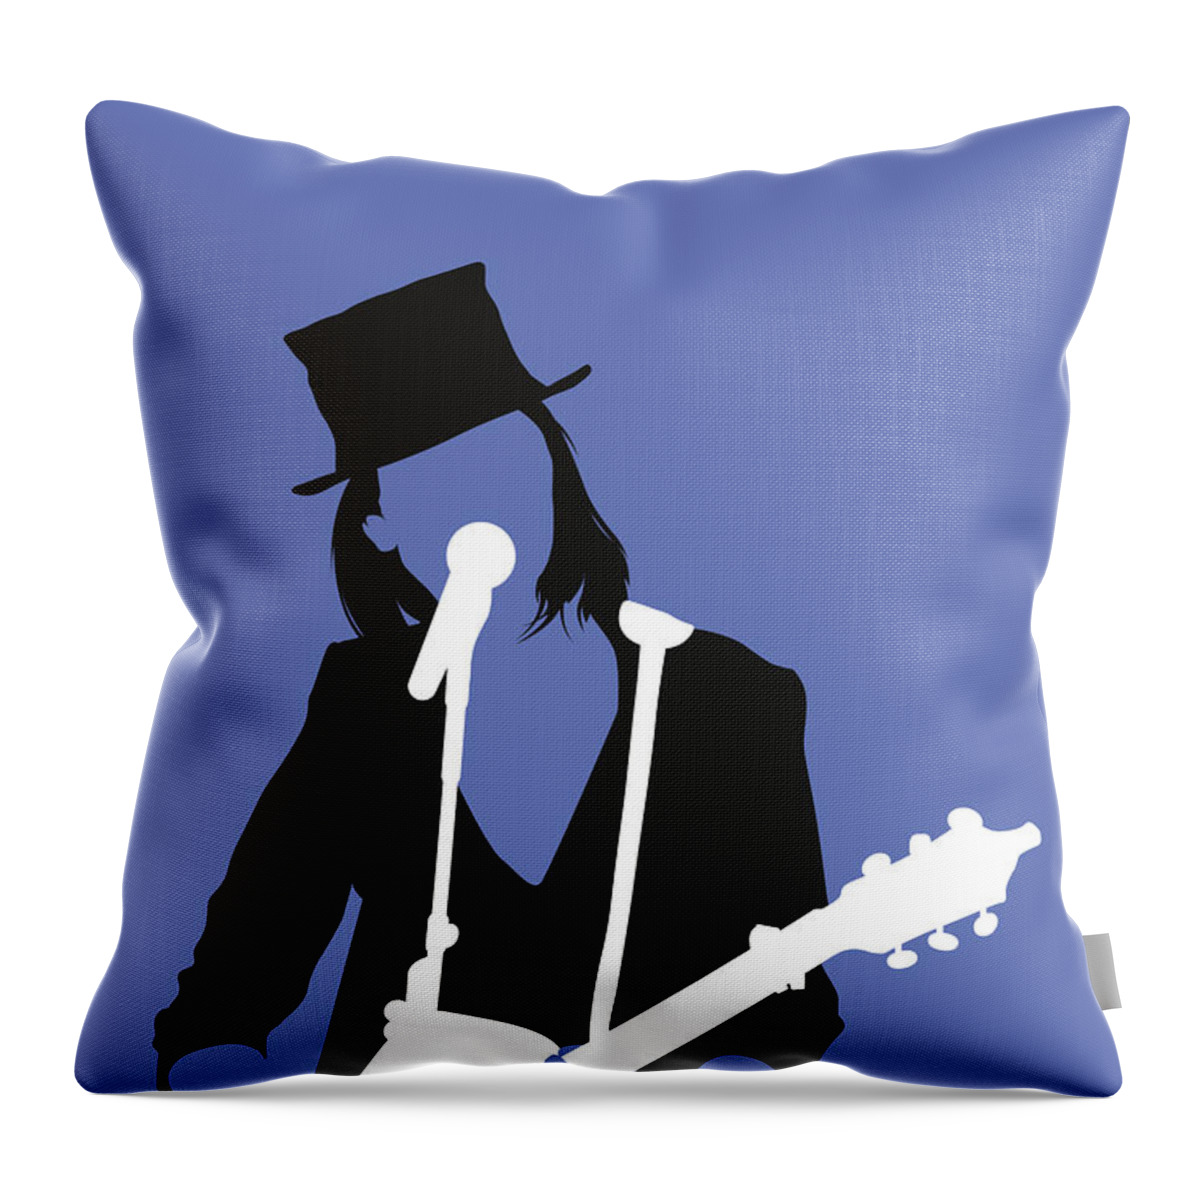 Suzanne Throw Pillow featuring the digital art No298 MY Suzanne Vega-MMuP-notxt by Chungkong Art